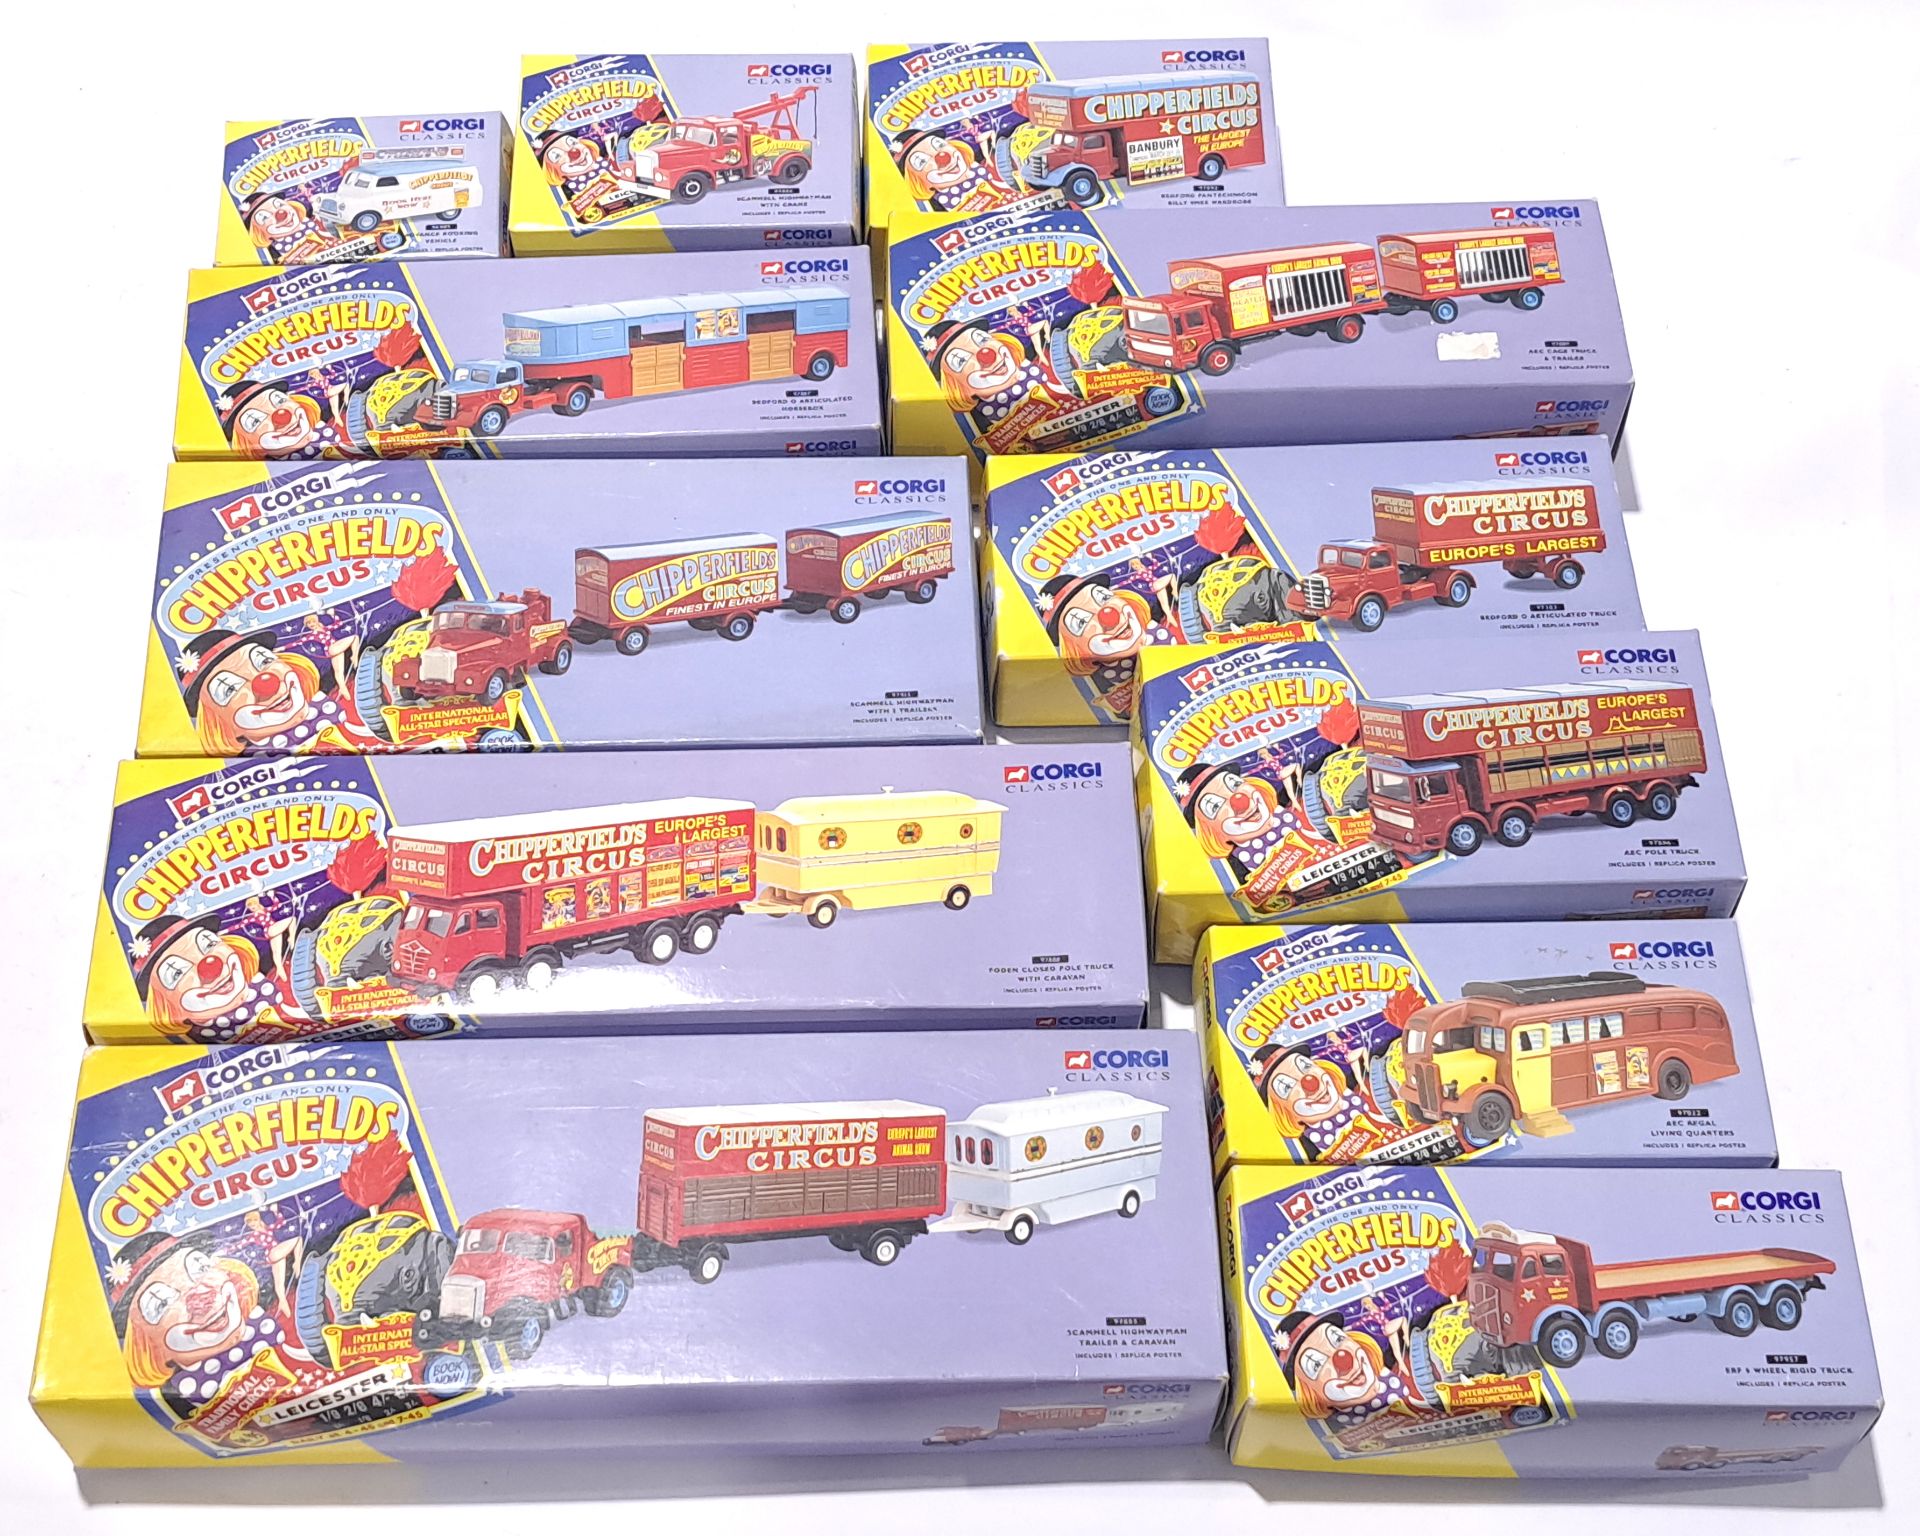 Corgi Classics 'Chipperfield Circus' set of 12 boxed group. Conditions generally appear Excellent...